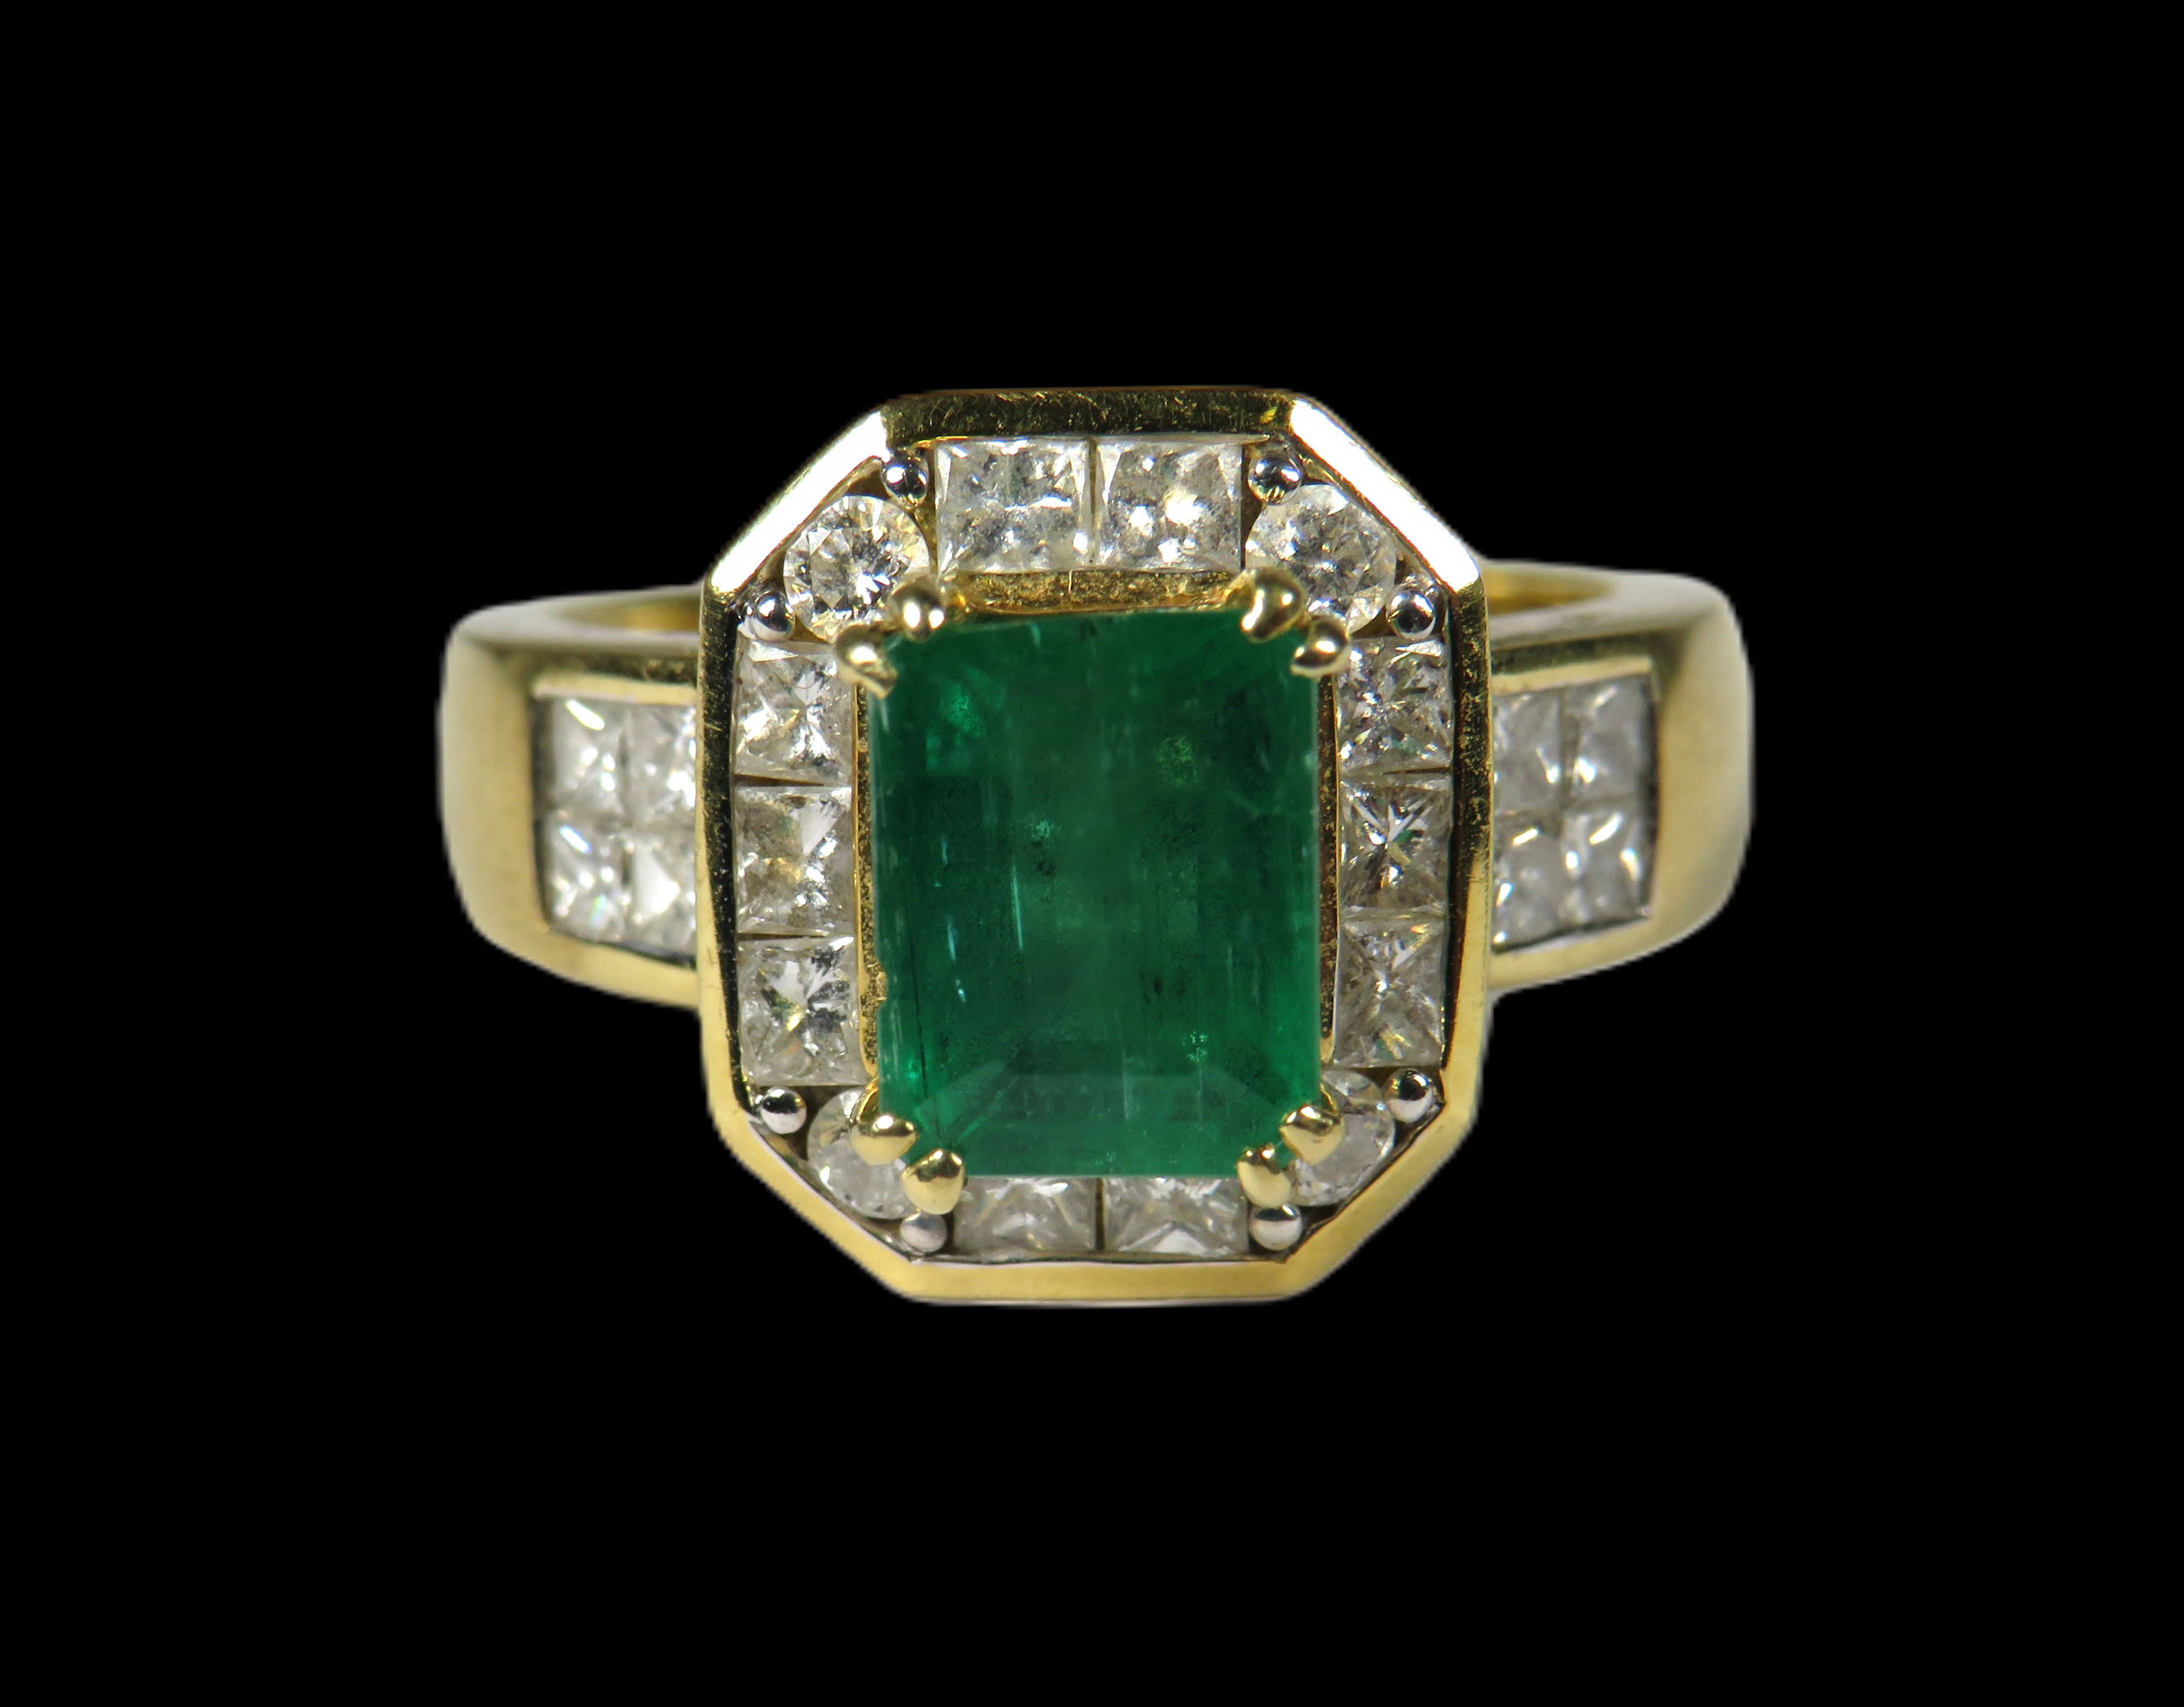 18ct Yellow Gold Art Deco Style Ring set with an amazing Central Emerald - Image 3 of 3